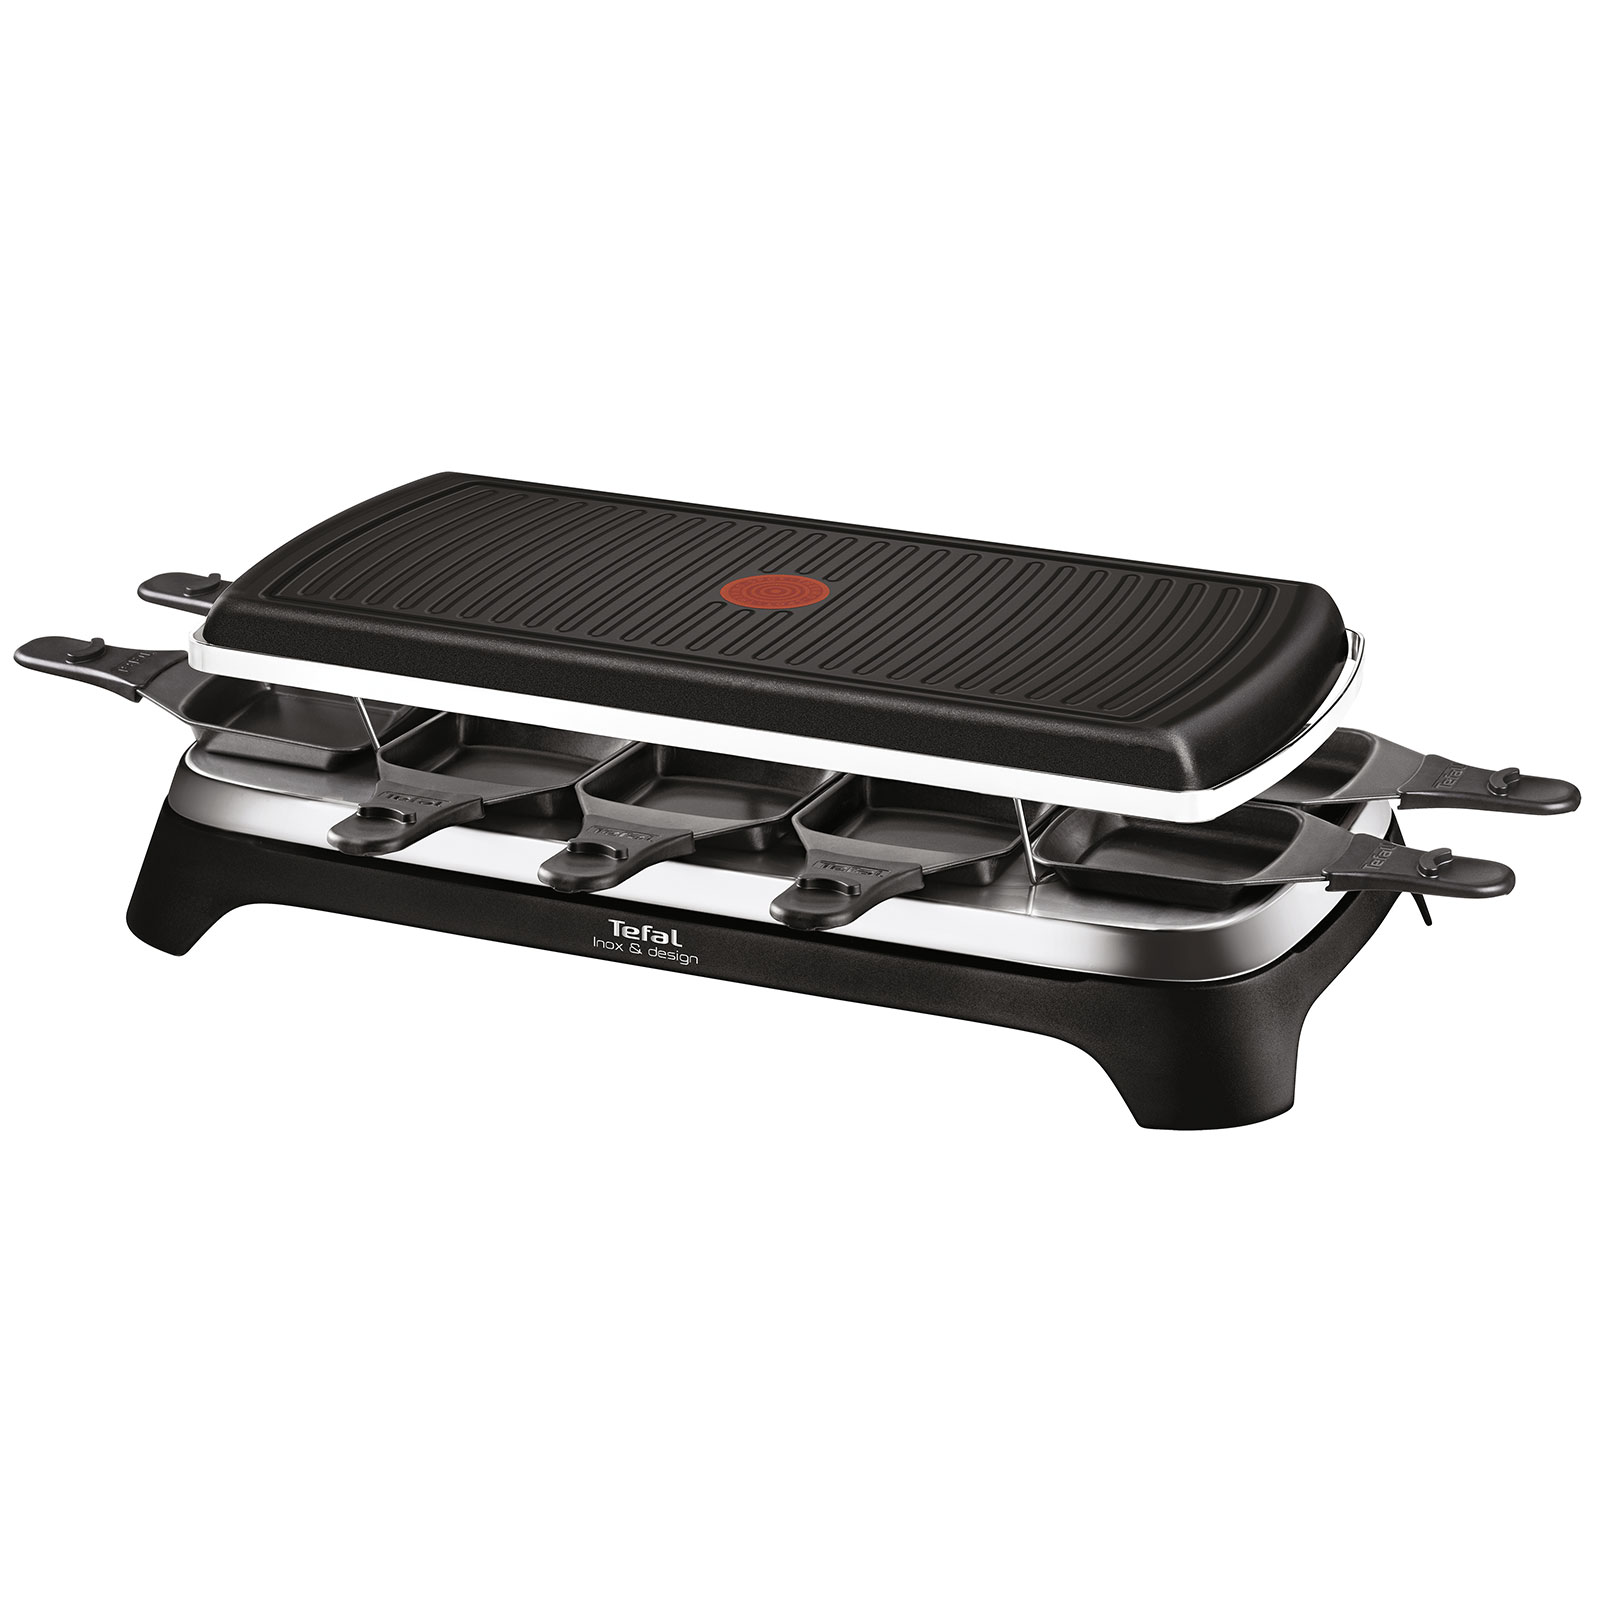 TEFAL RE 4588 Raclette-Grill 10